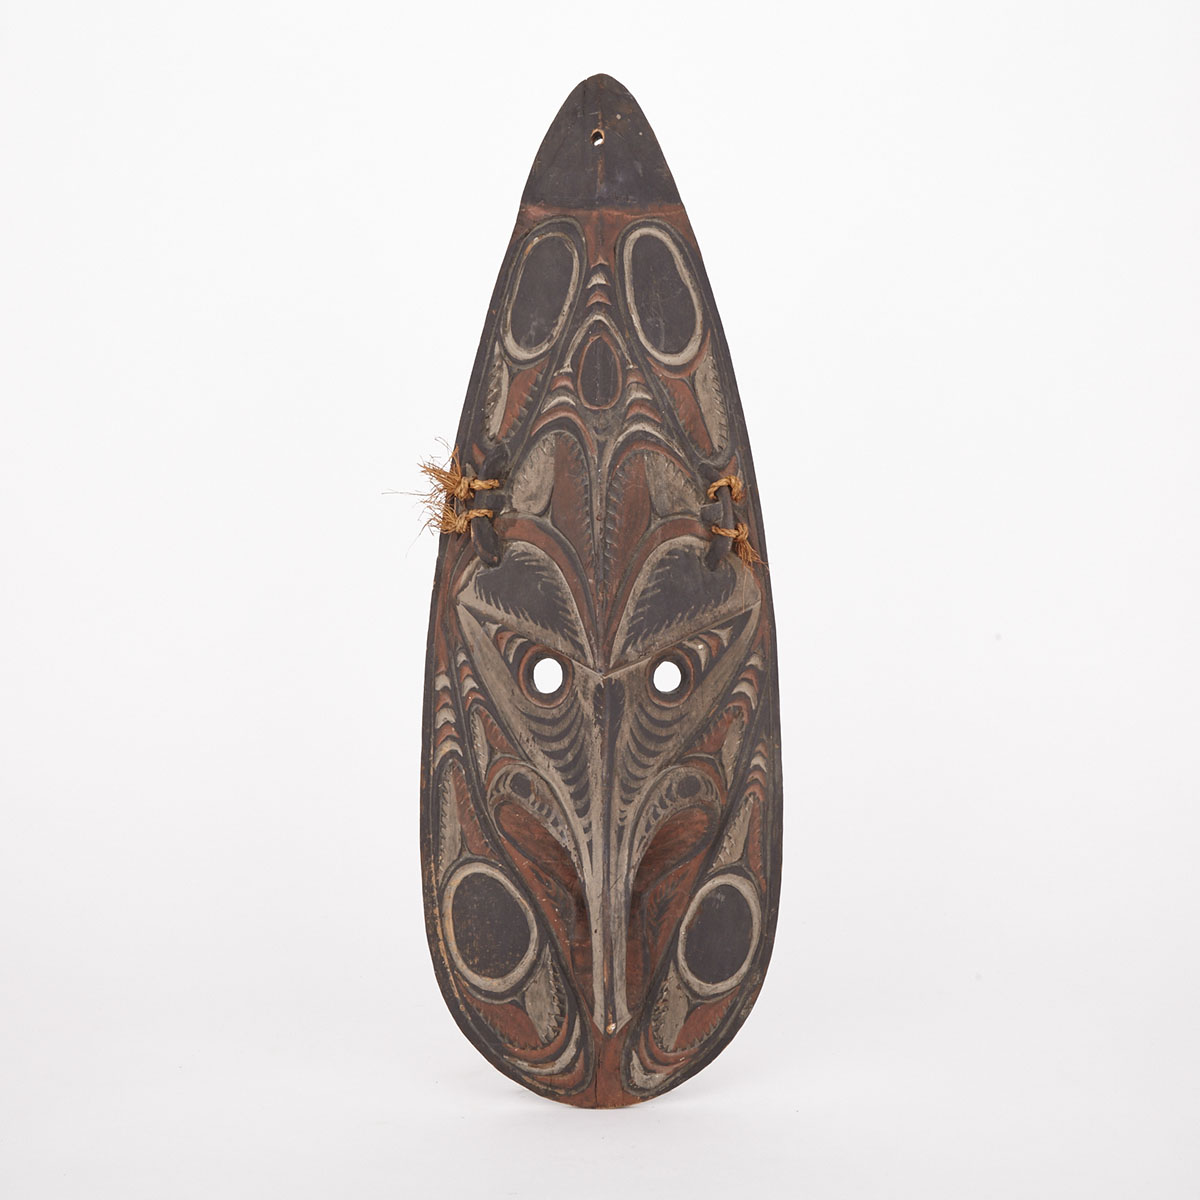 Carved and Painted Wood Spirit Mask, Sepik River, Papua New Guinea, 20th century